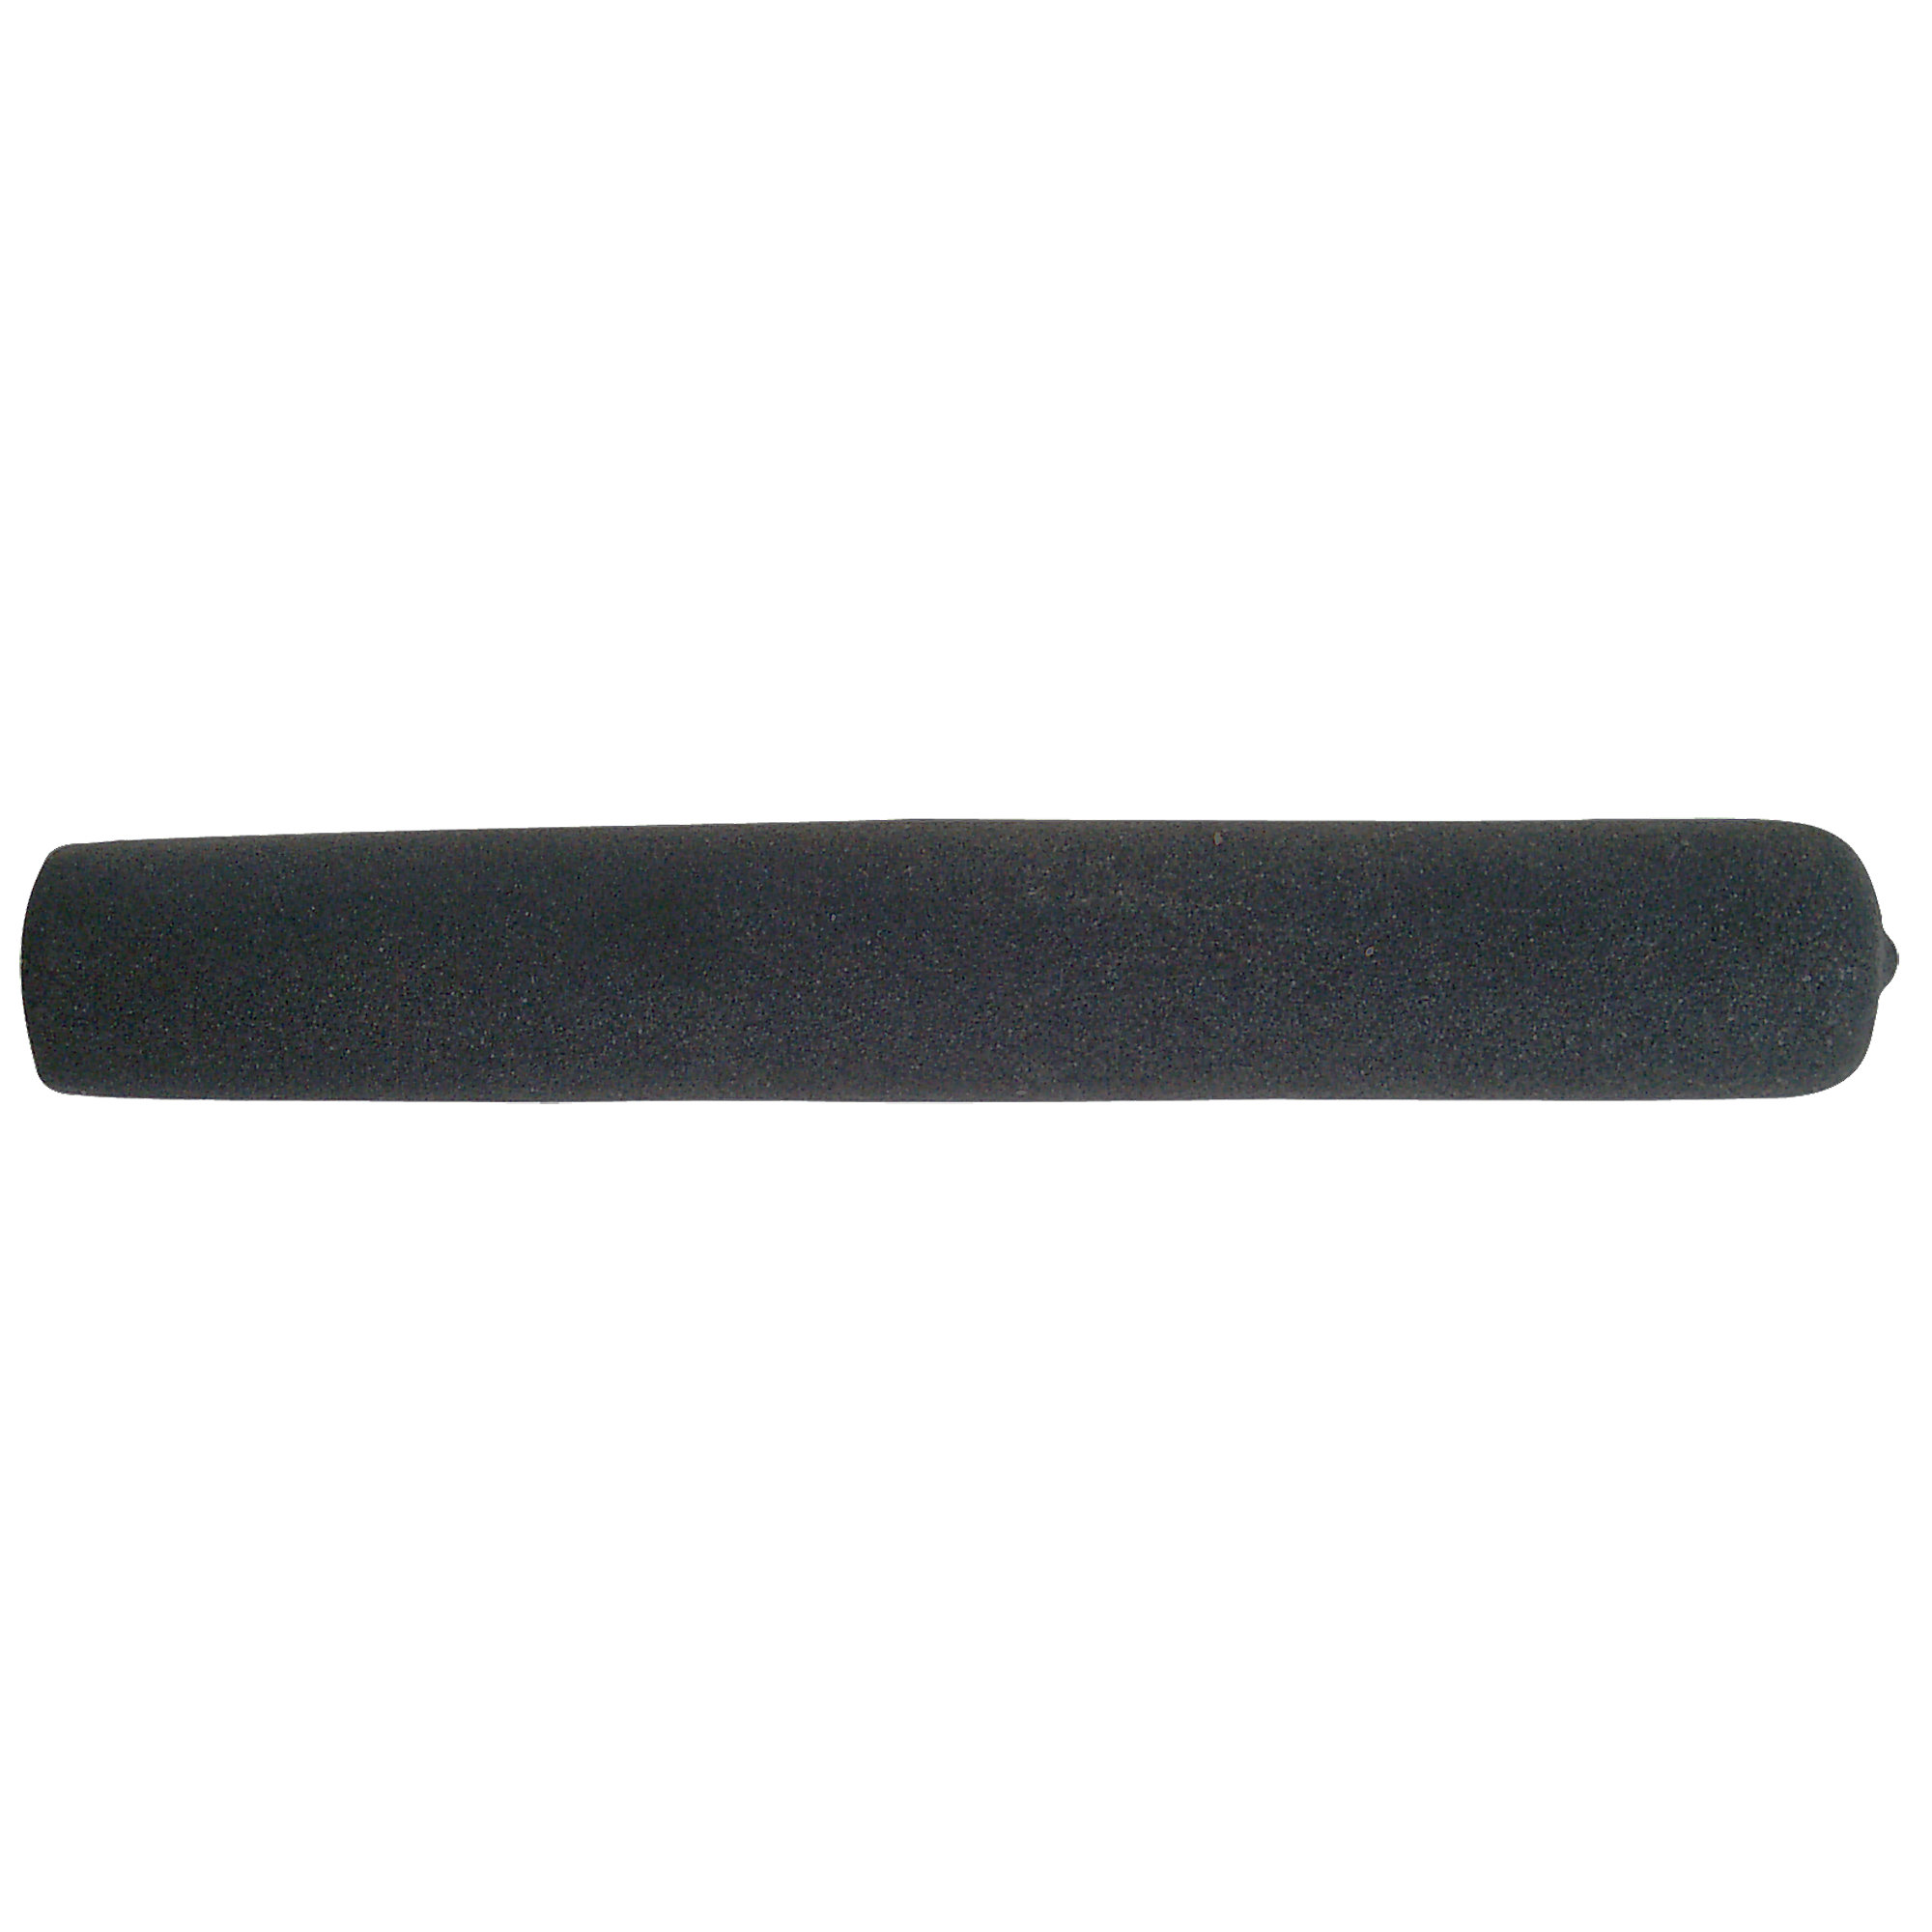 Closed End Rubber Grip, 8" Long, Fits 1", Each